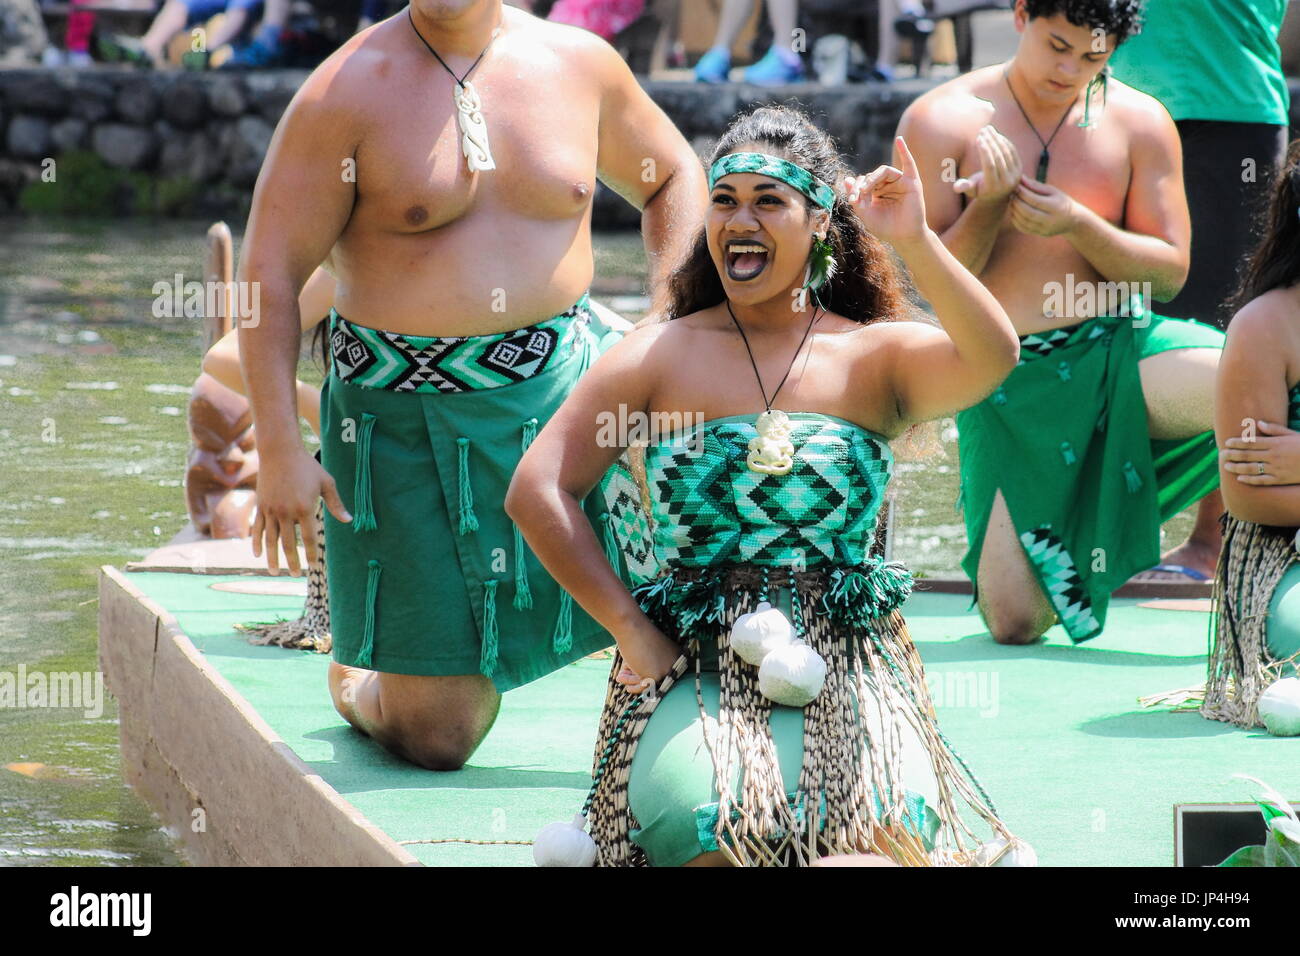 Honolulu, Hawaii - May 27, 2016: Maori Perfomers during the  'Rainbows of Paradise' Pageant at the Polynesian Cultural Center on Oahu. Stock Photo